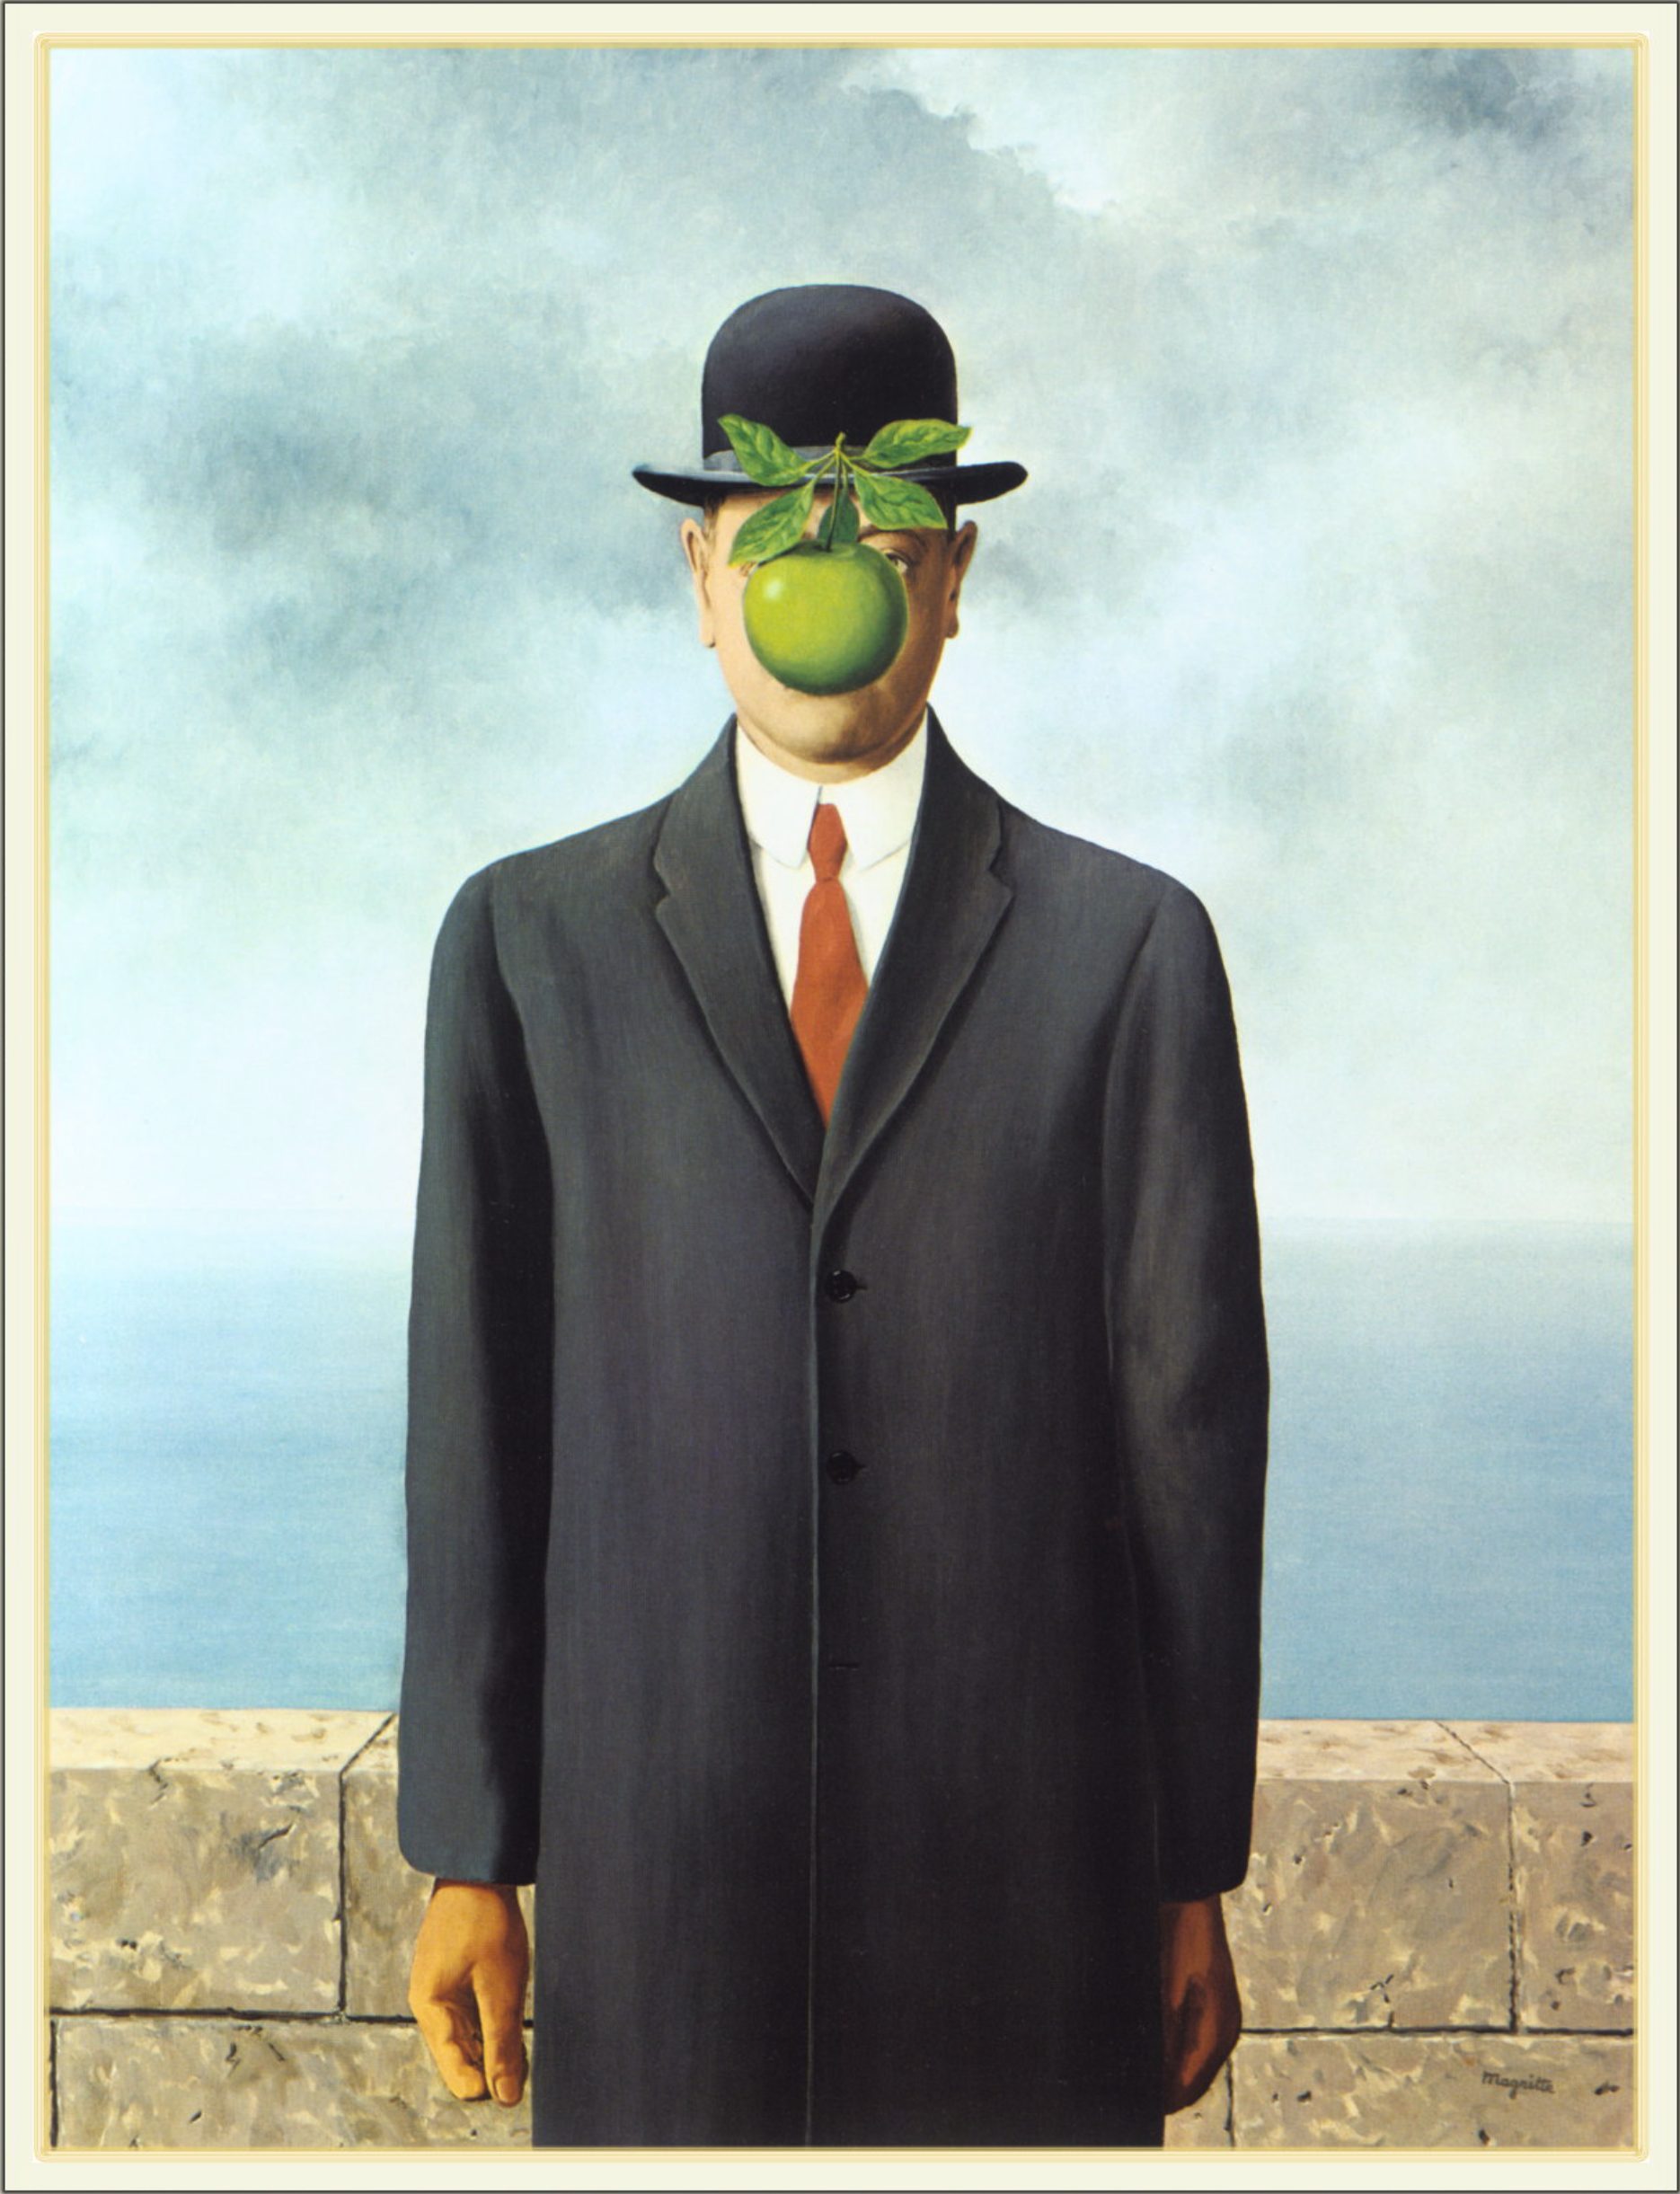 A painting depicting a man wearing a bowling hat, with a green apple covering his face